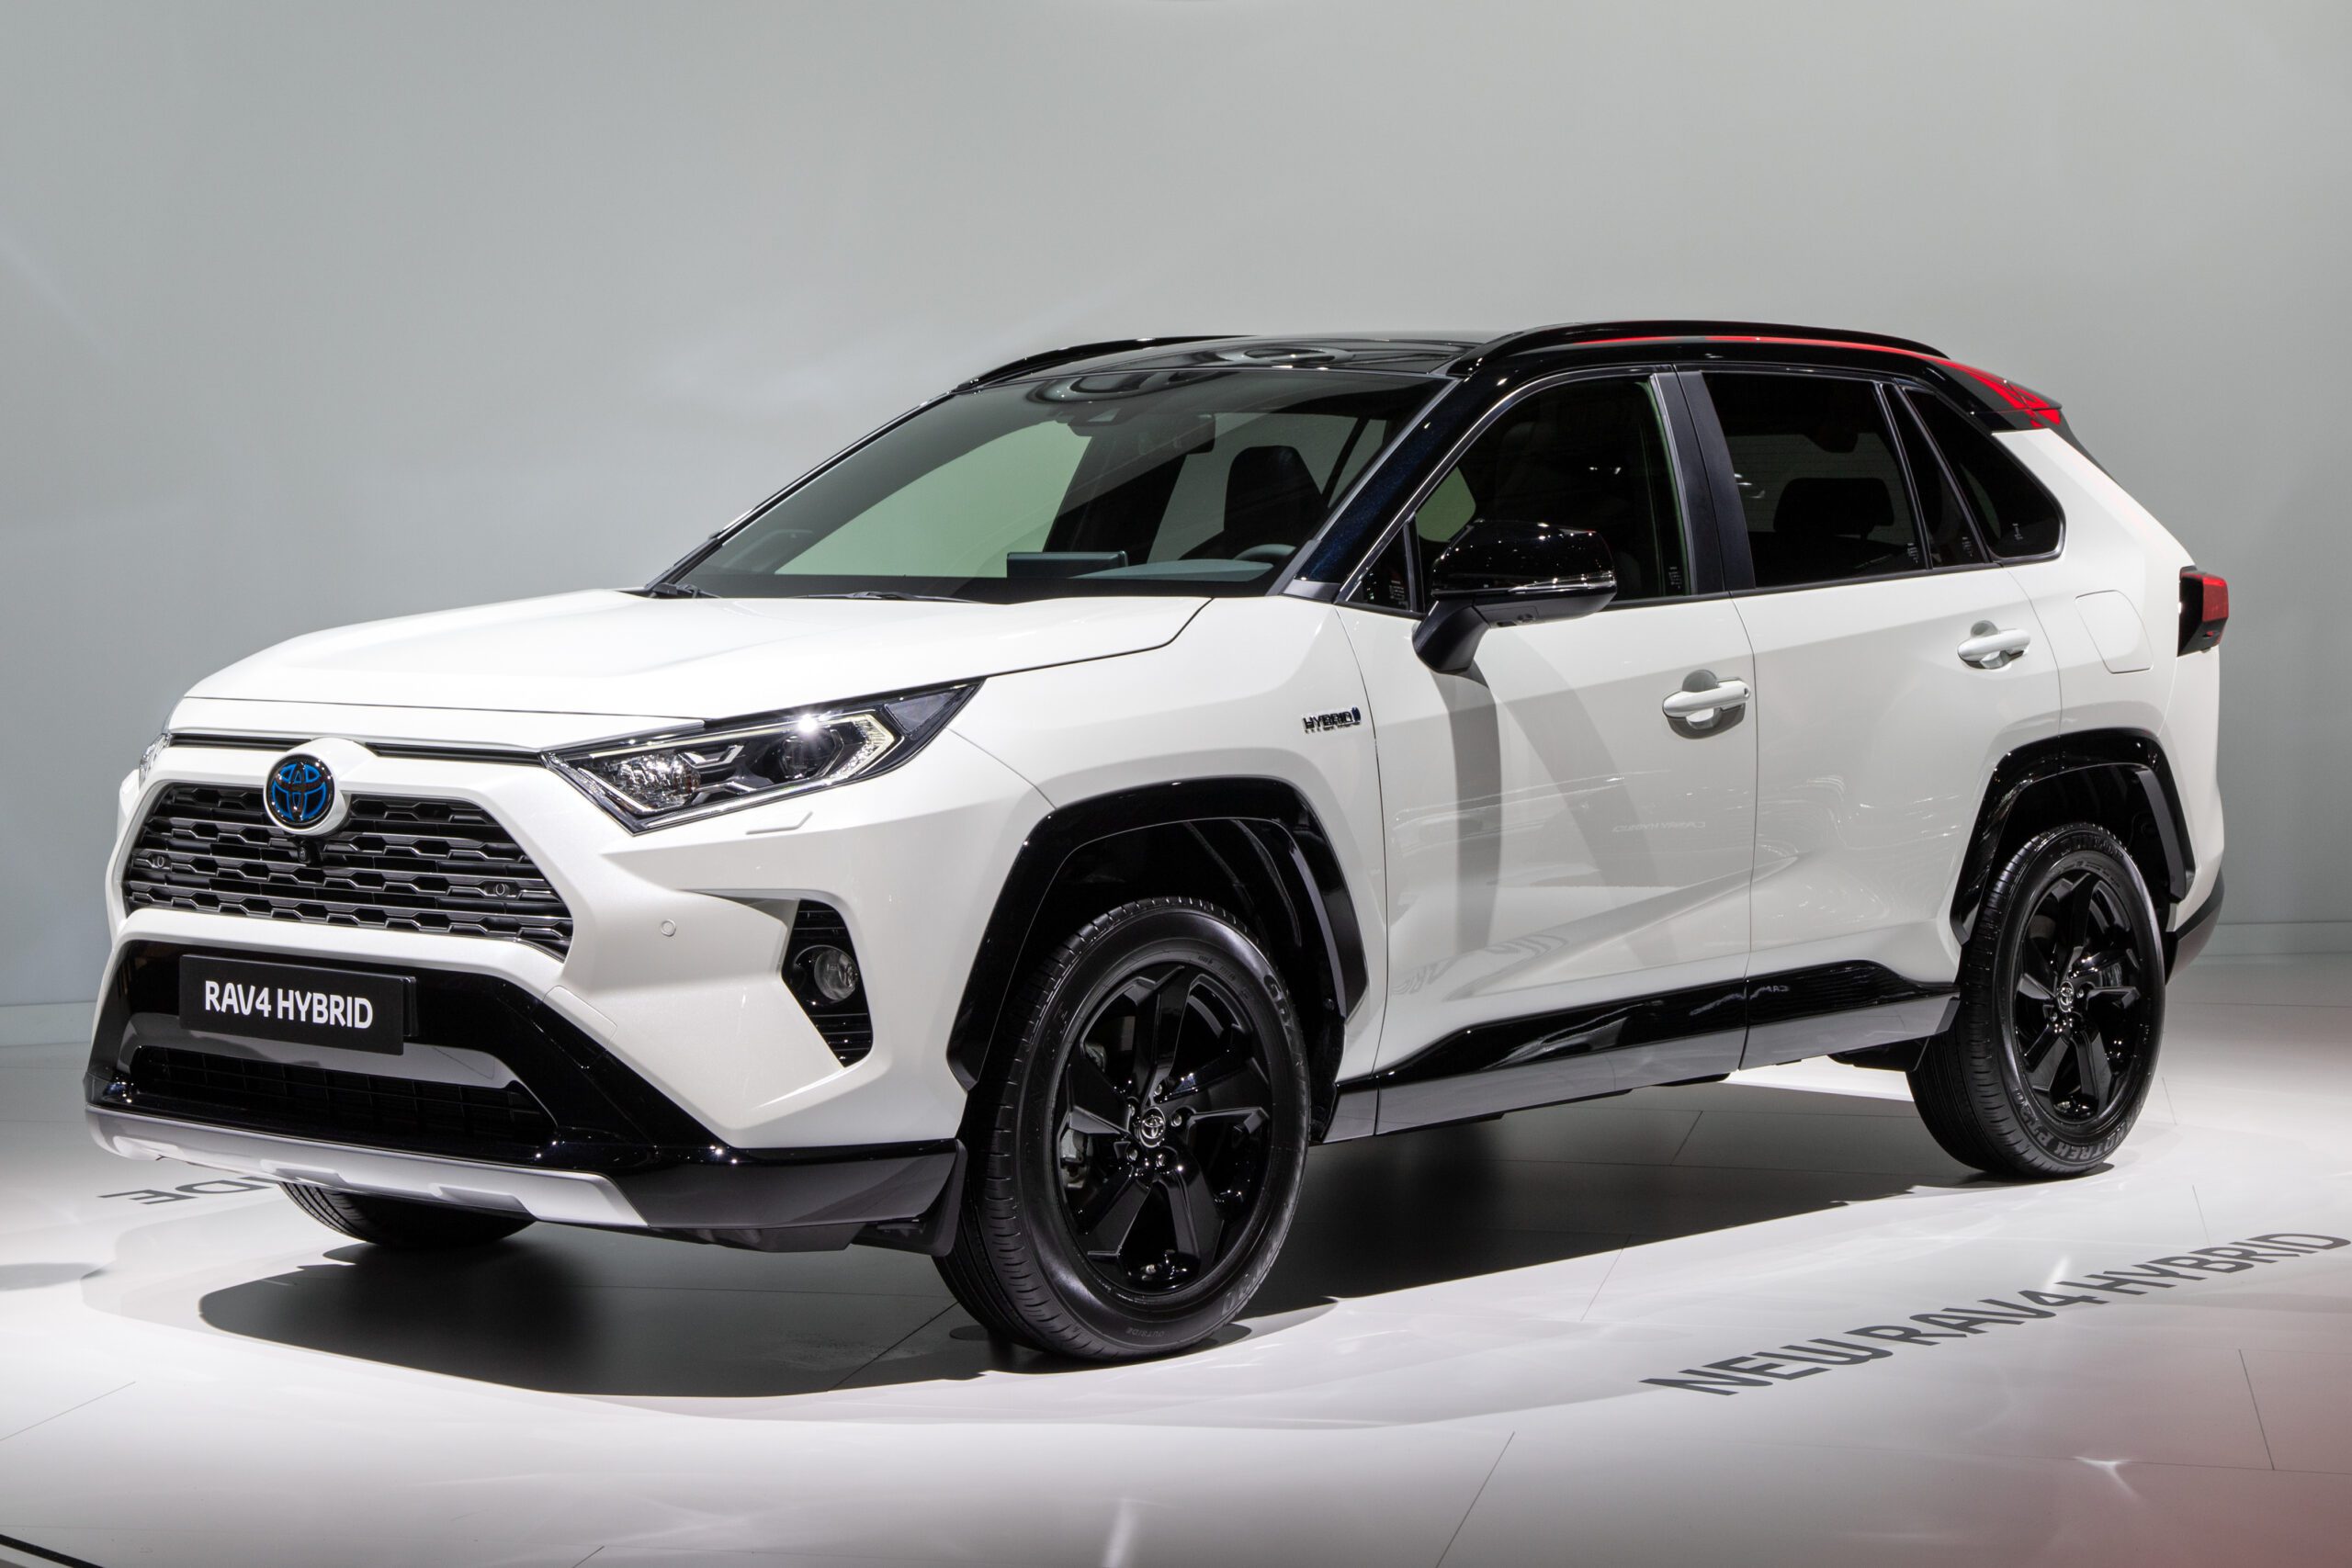 A proposed class action alleges that a defect in the 2020 Toyota RAV4 causes battery power to drain while the vehicle is turned off.